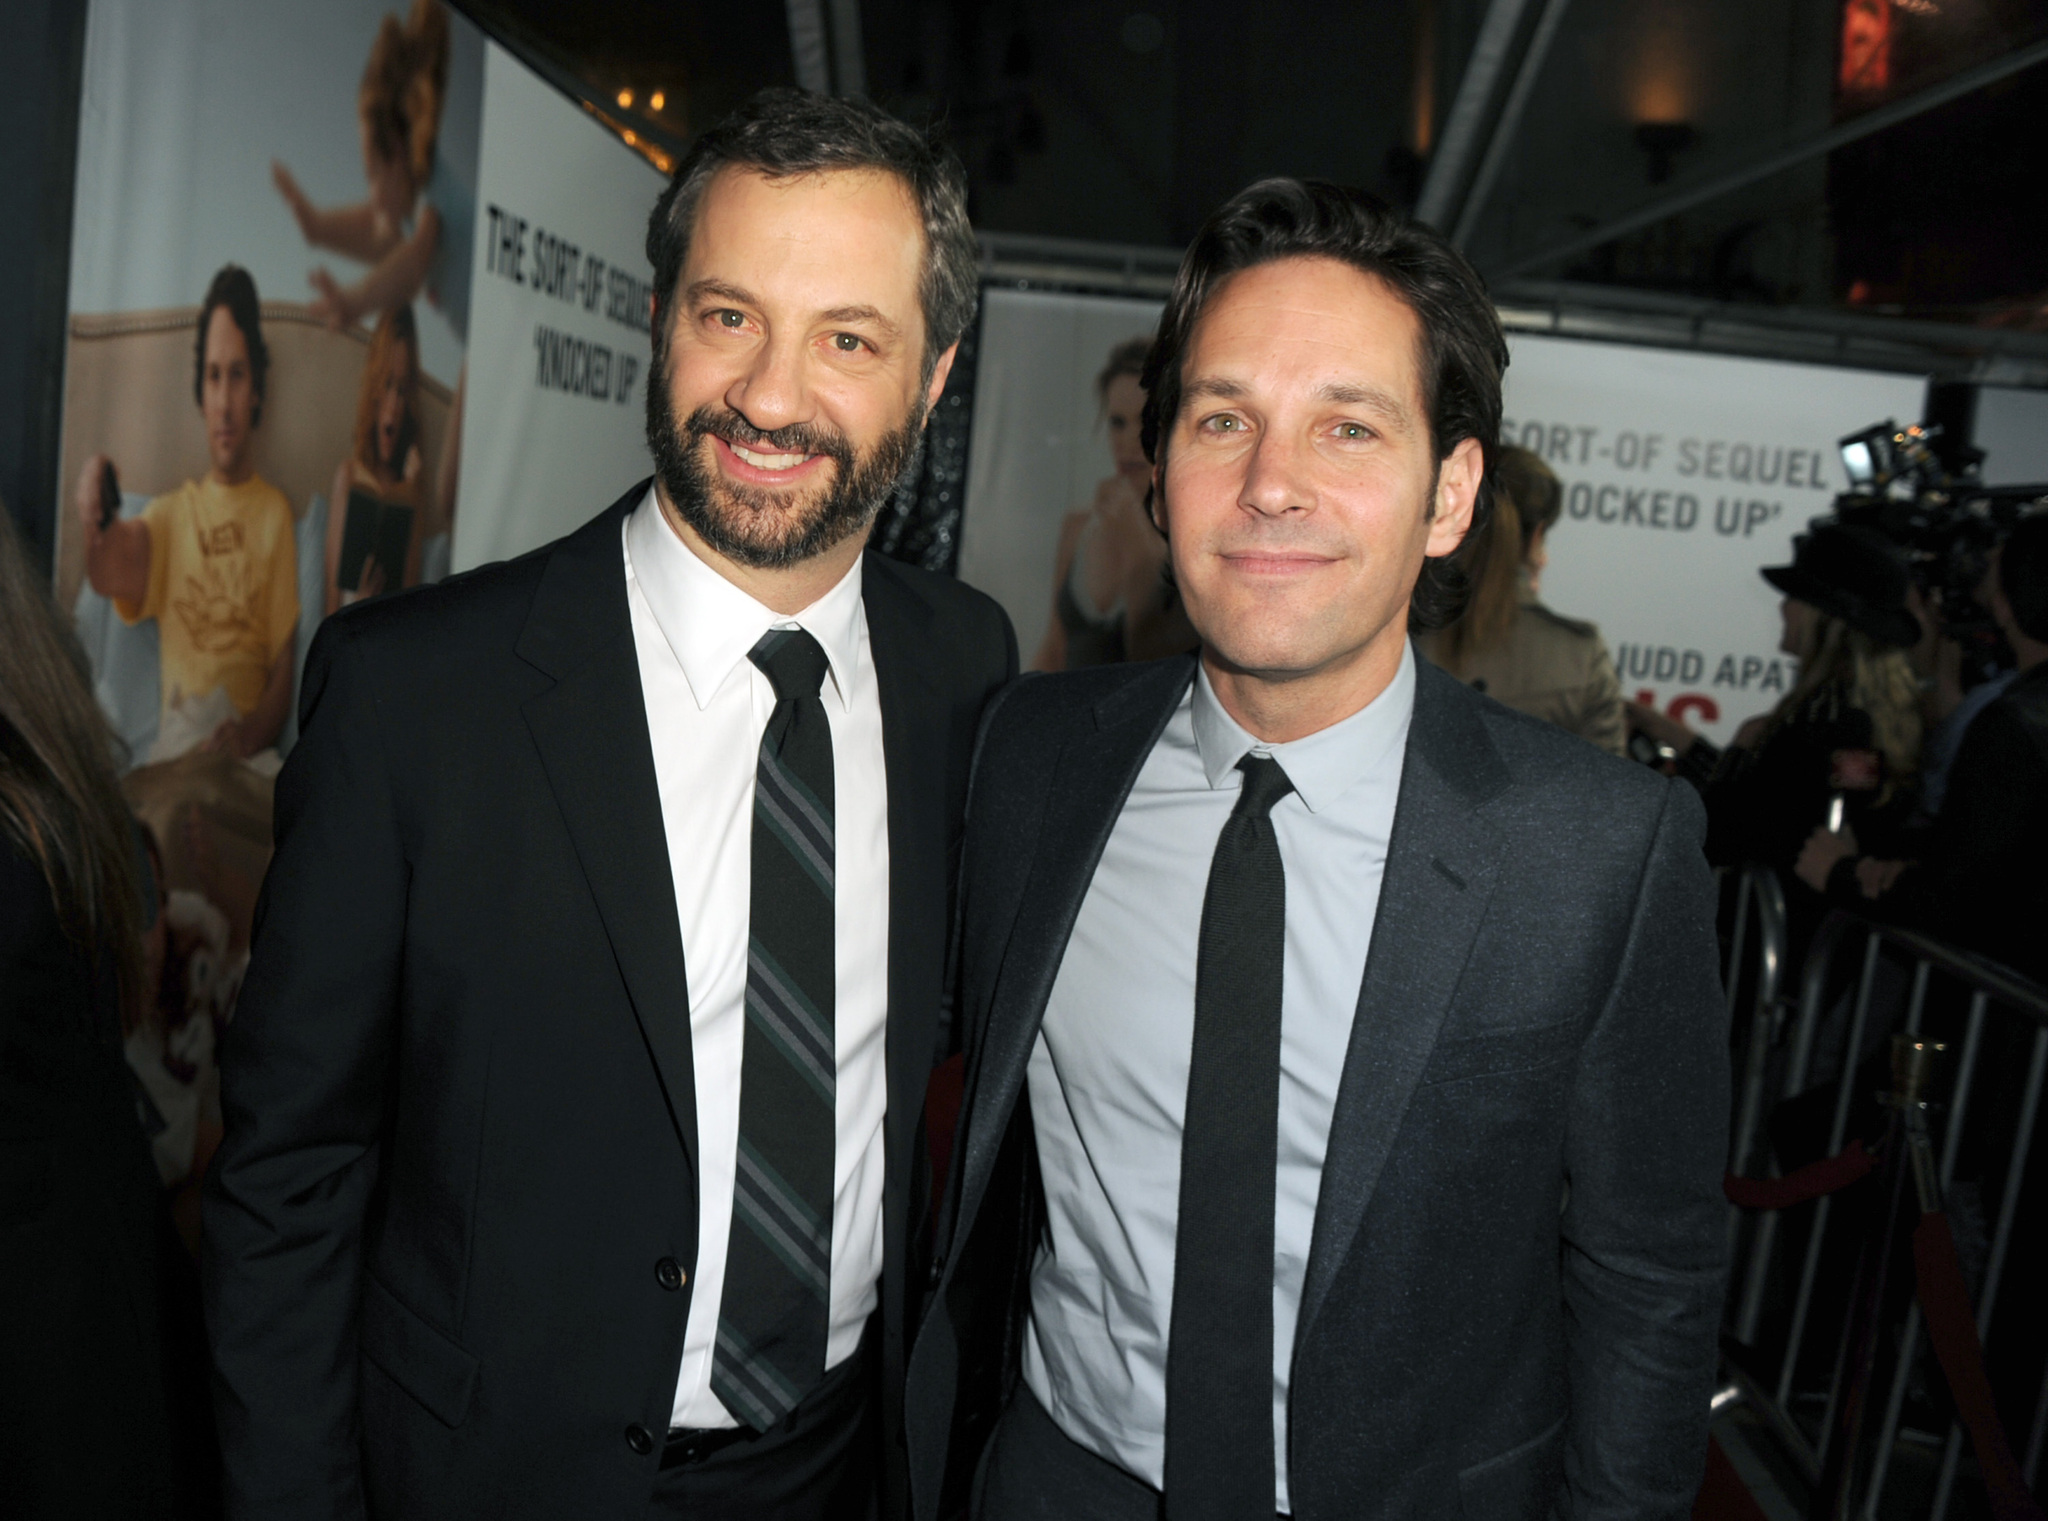 Judd Apatow and Paul Rudd at event of Tik 40 (2012)